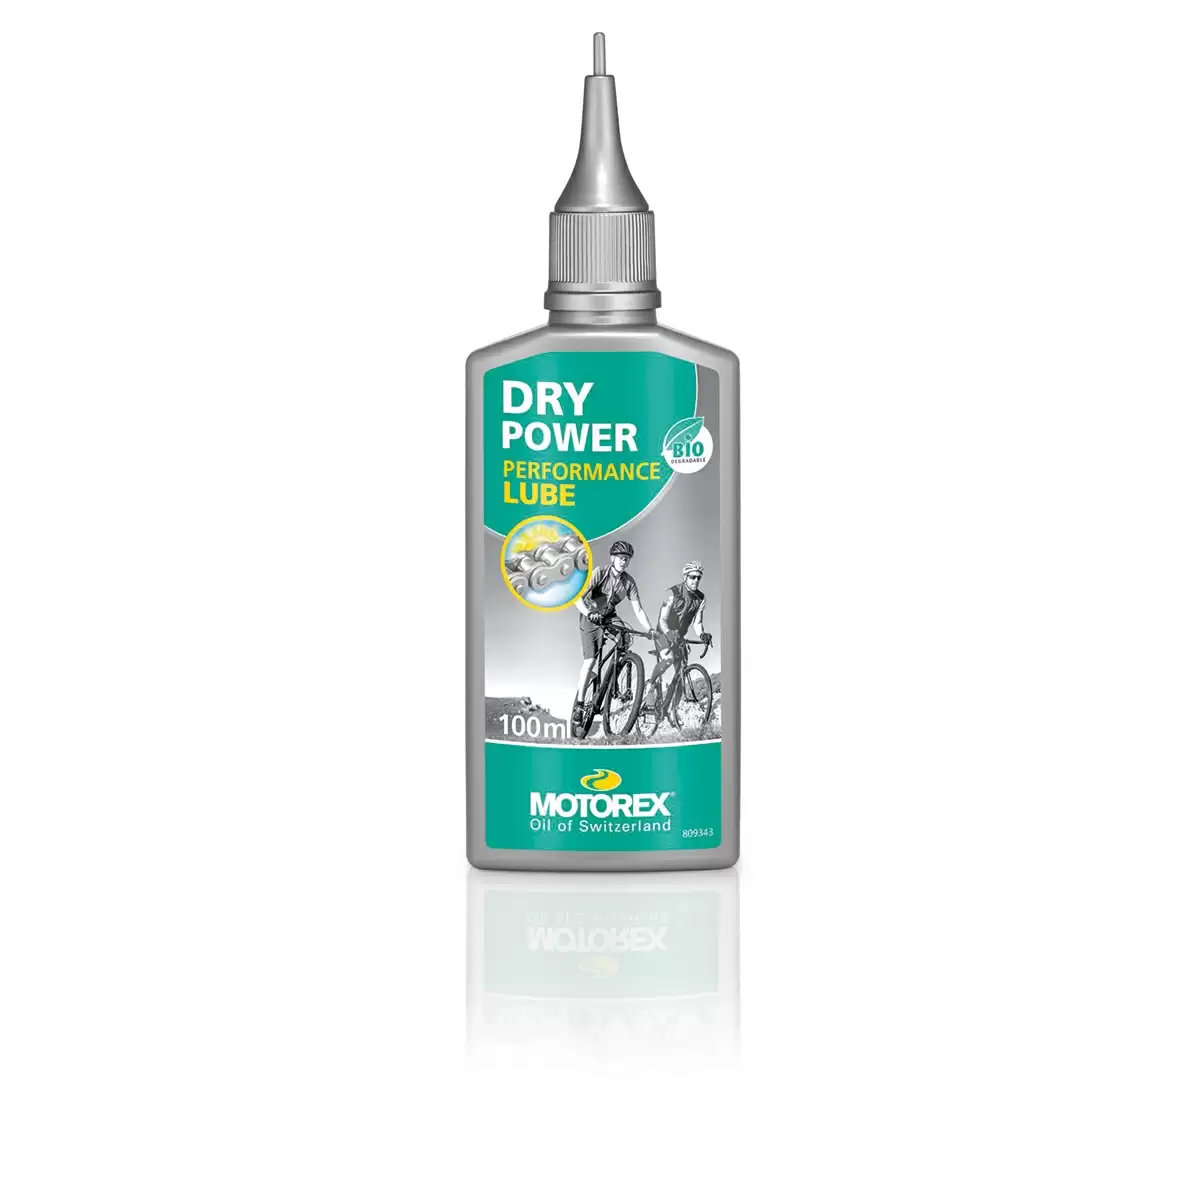 Dry Power Lube Flasche 100ml - image